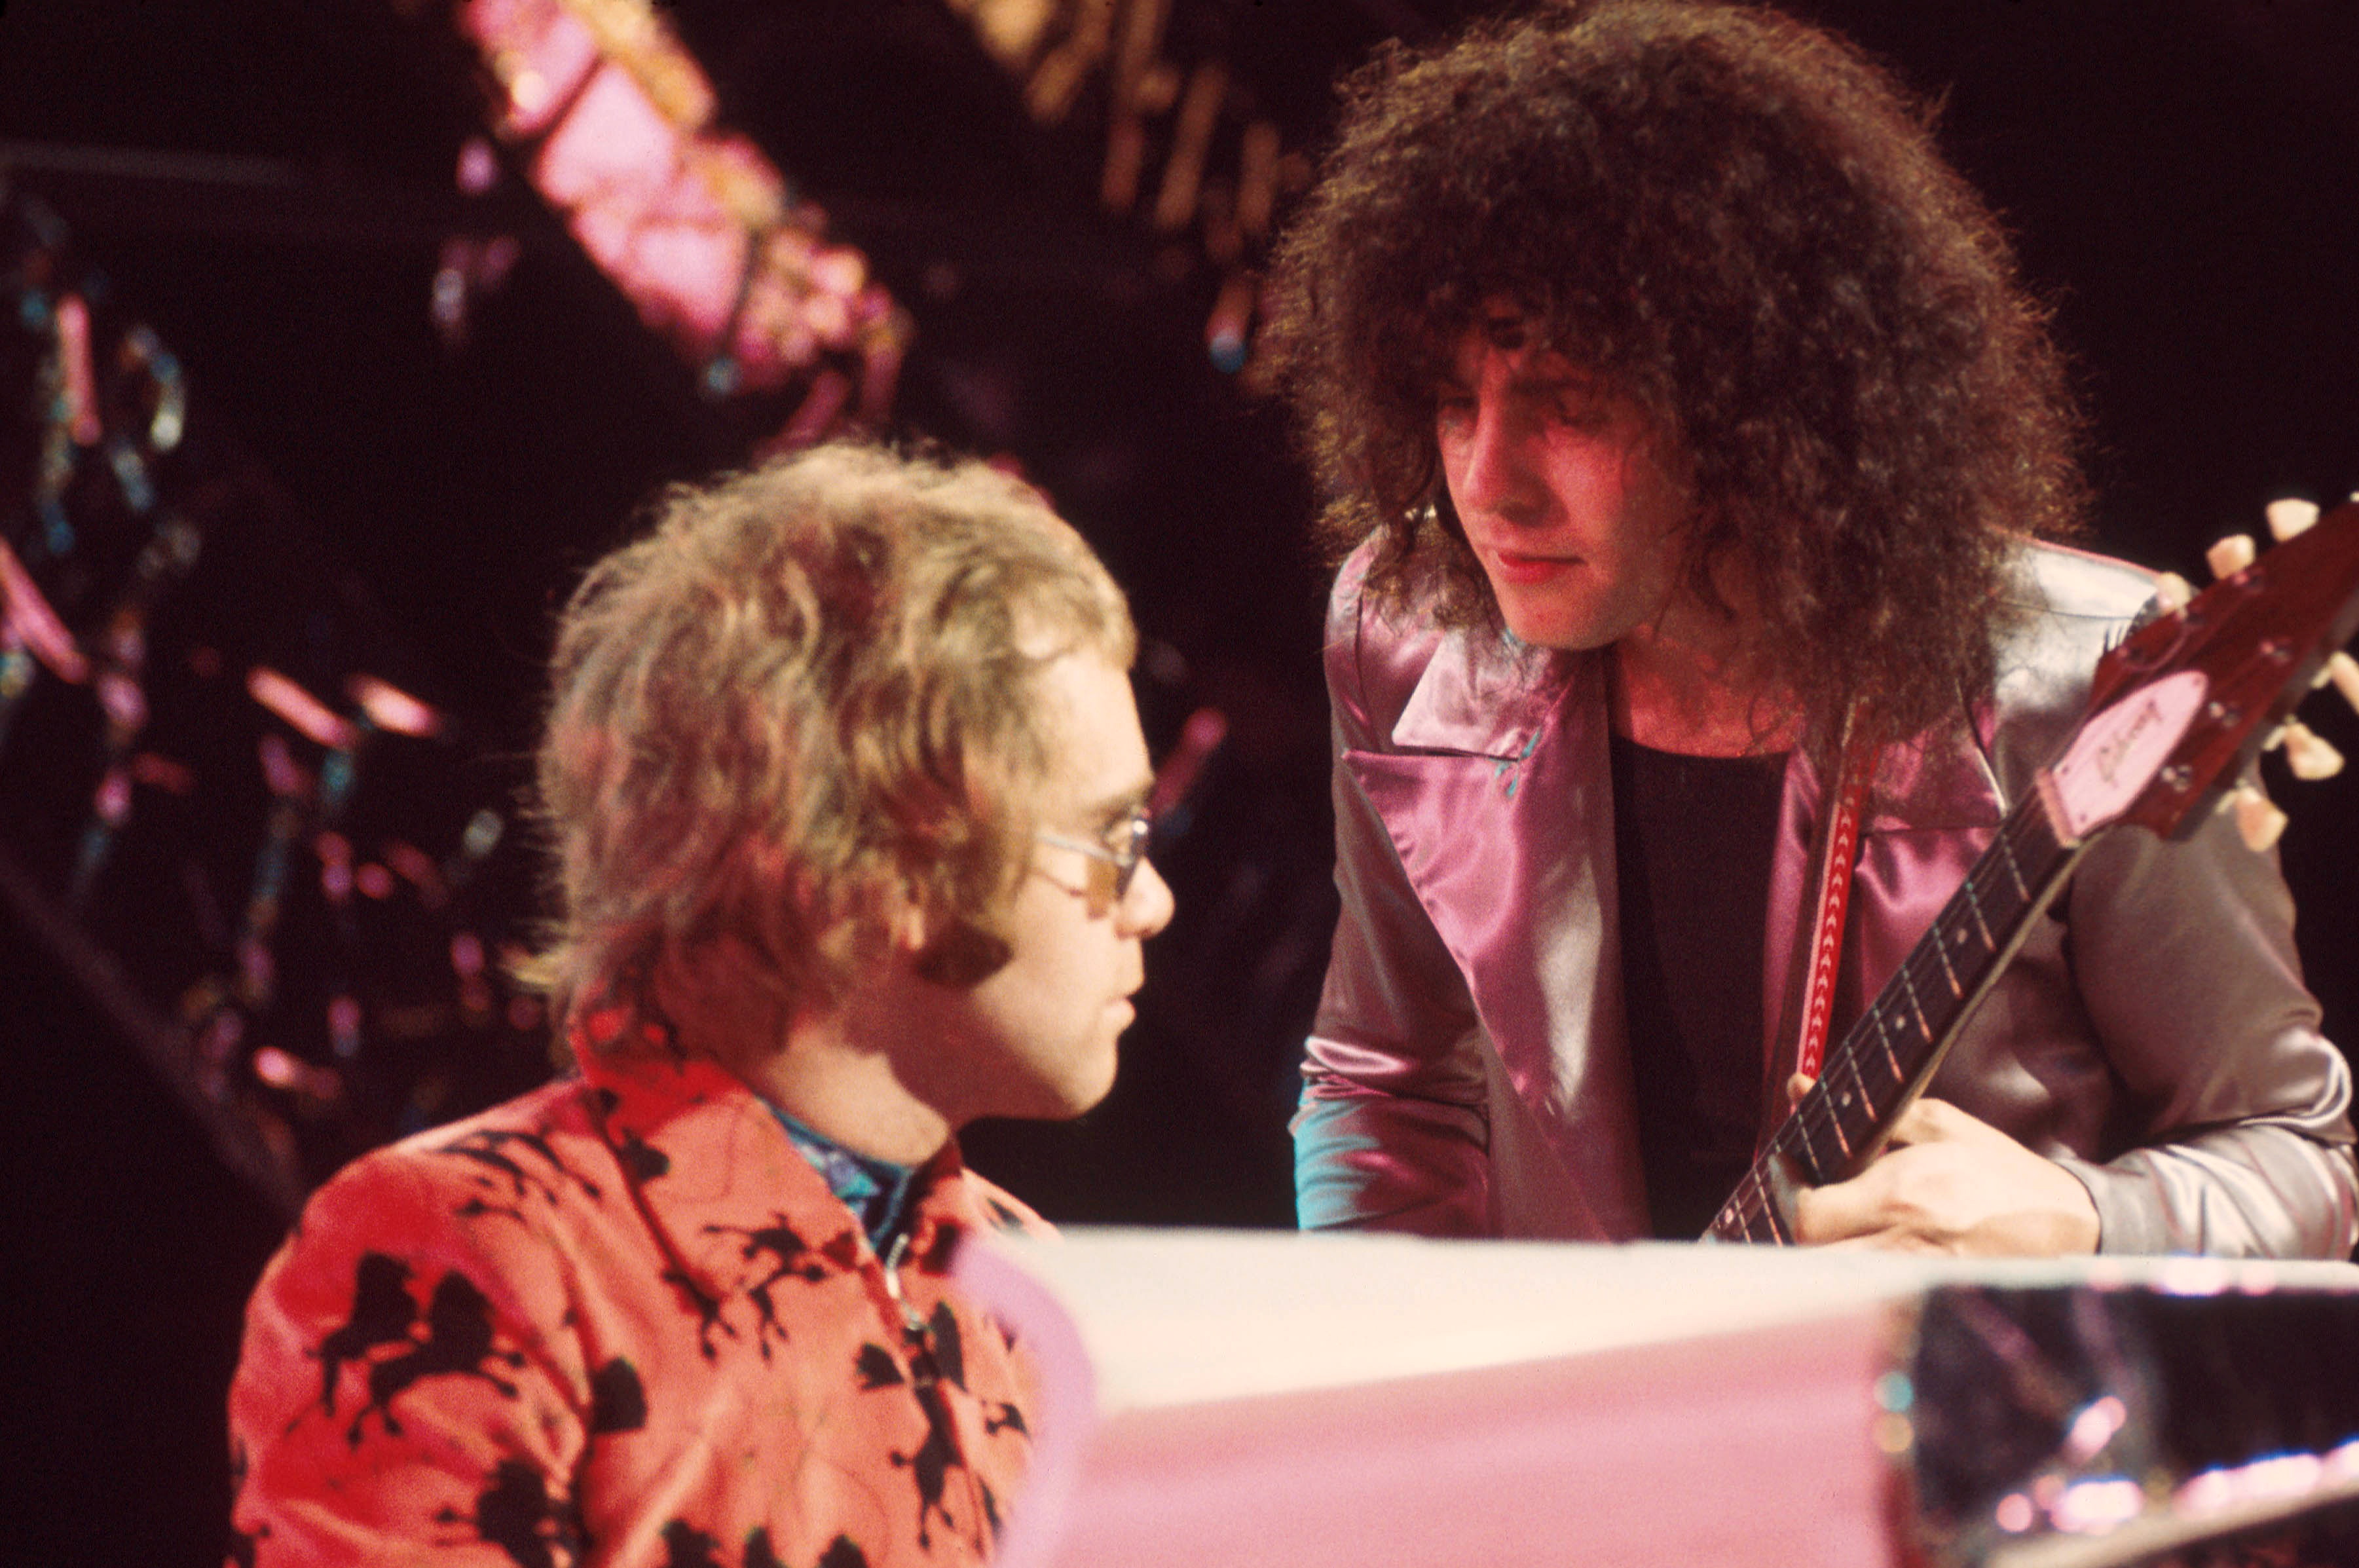 Elton John, who performed with Bolan back in the day and plays piano on U2’s rendition of Get It On, says: “He inspired people like me and Bowie — he was so ahead of his time